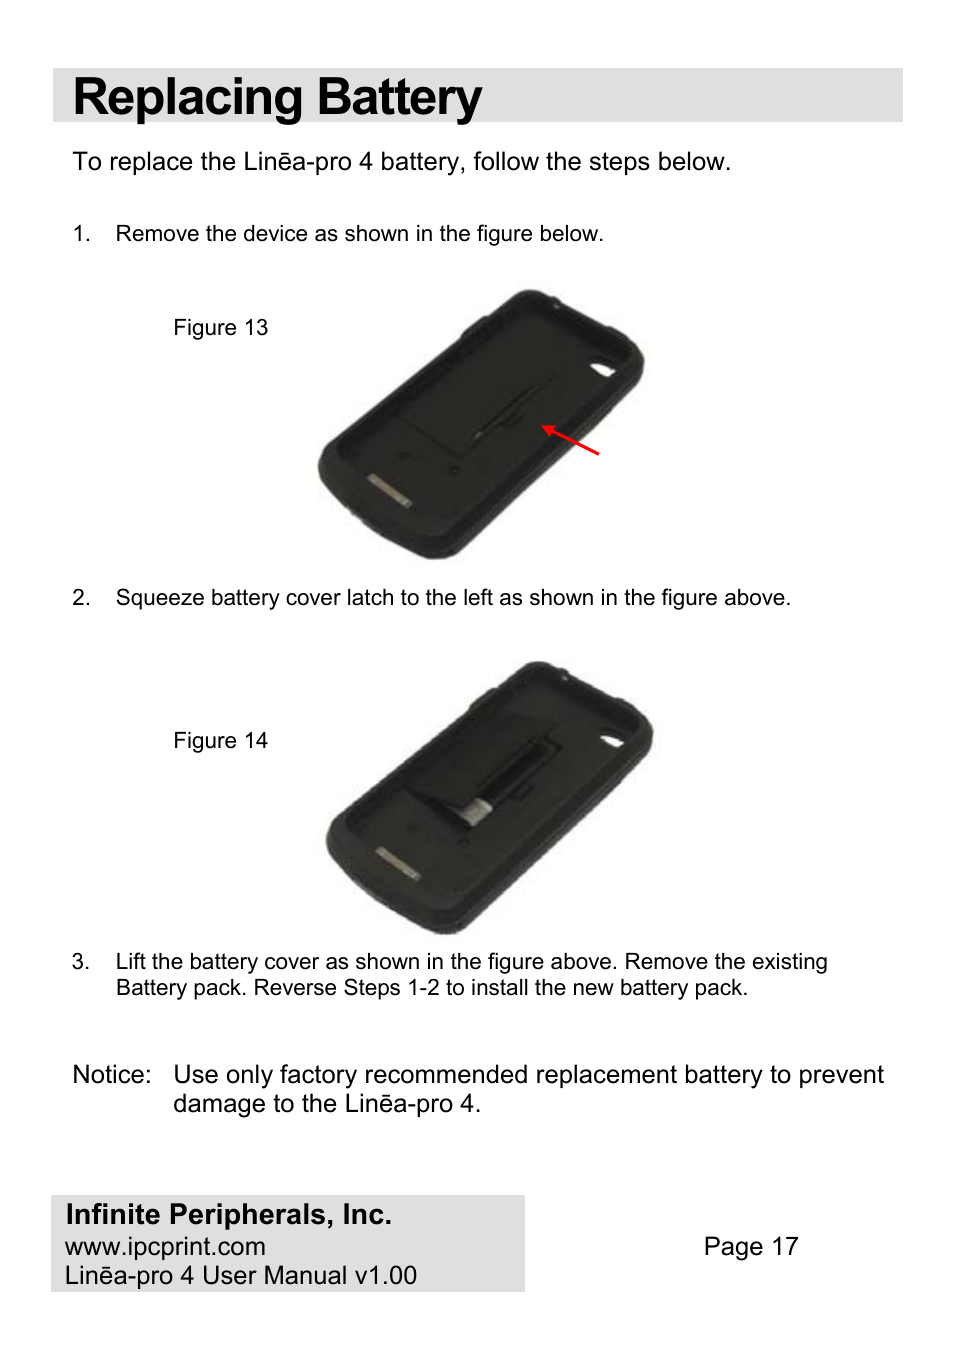 Replacing battery | Infinite Peripherals PRO 4 User Manual | Page 17 / 24